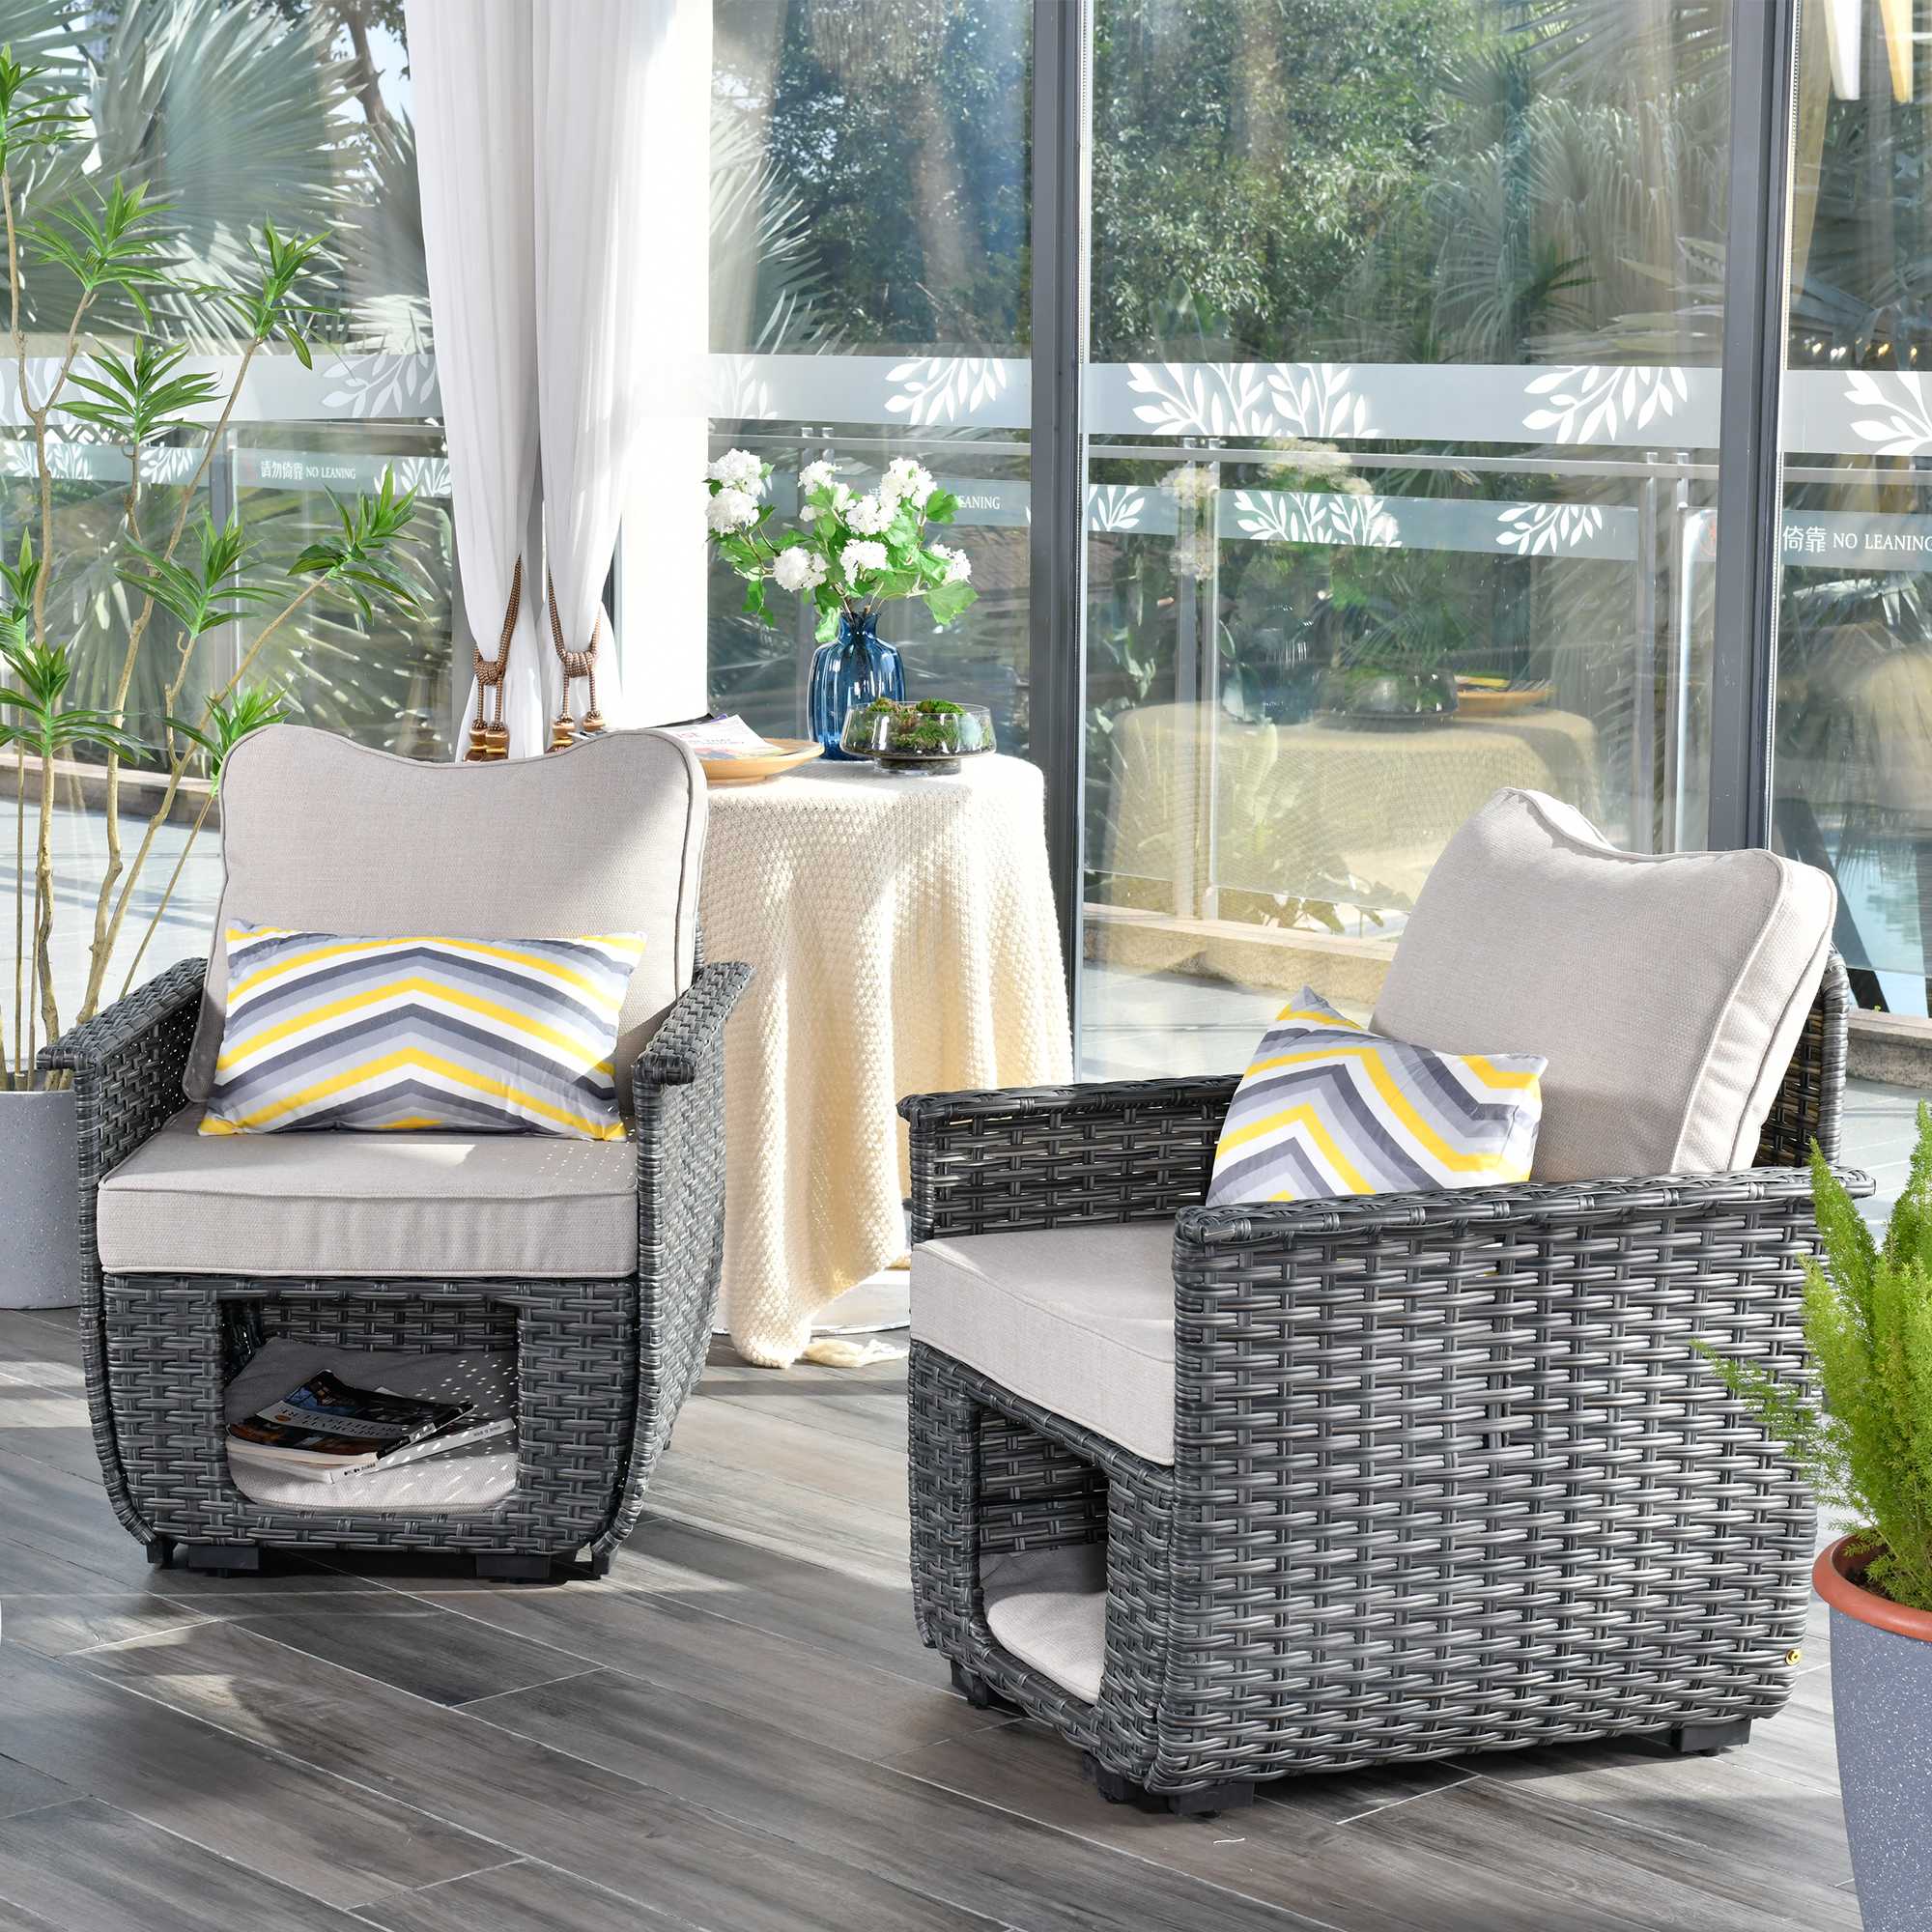 Ovios Patio Chairs *2 Pieces ,Multifunctional Storage,Pet Serie